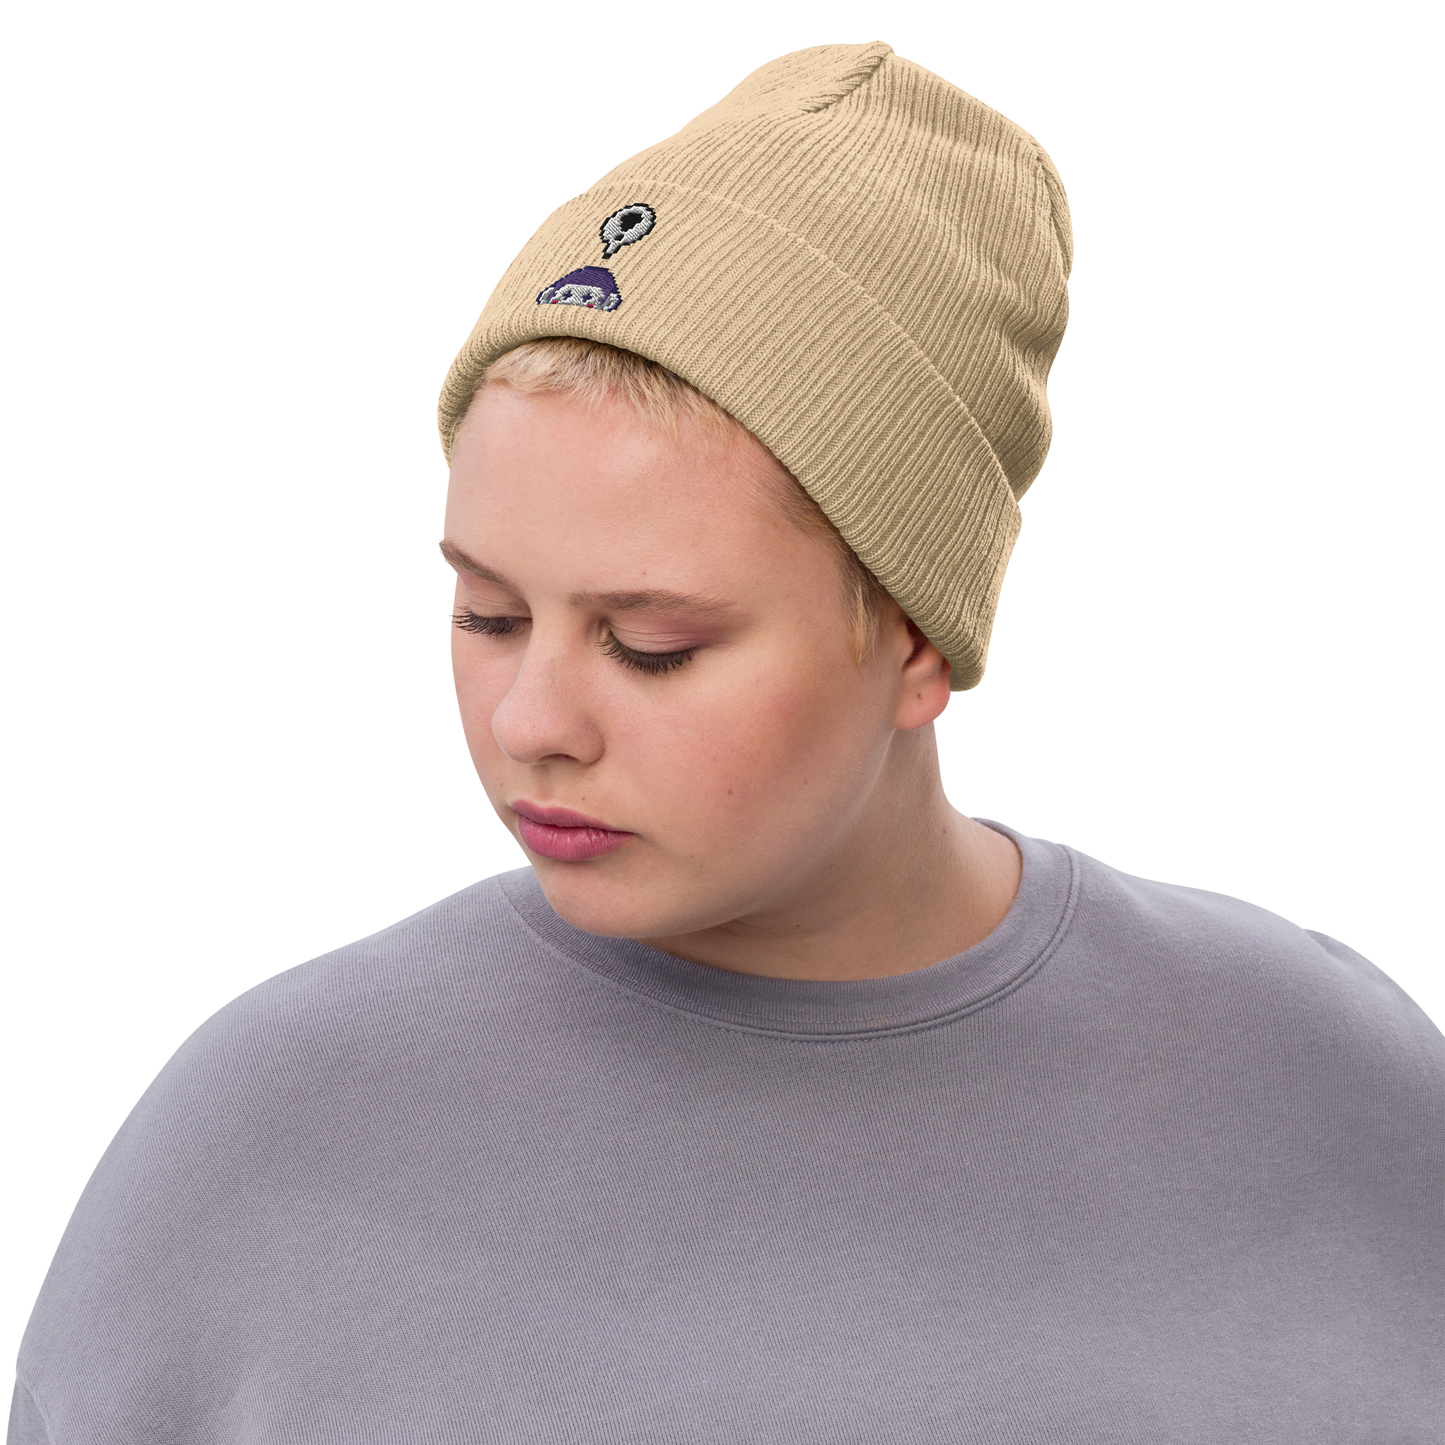 Pixelated Ribbed Knit Beanie